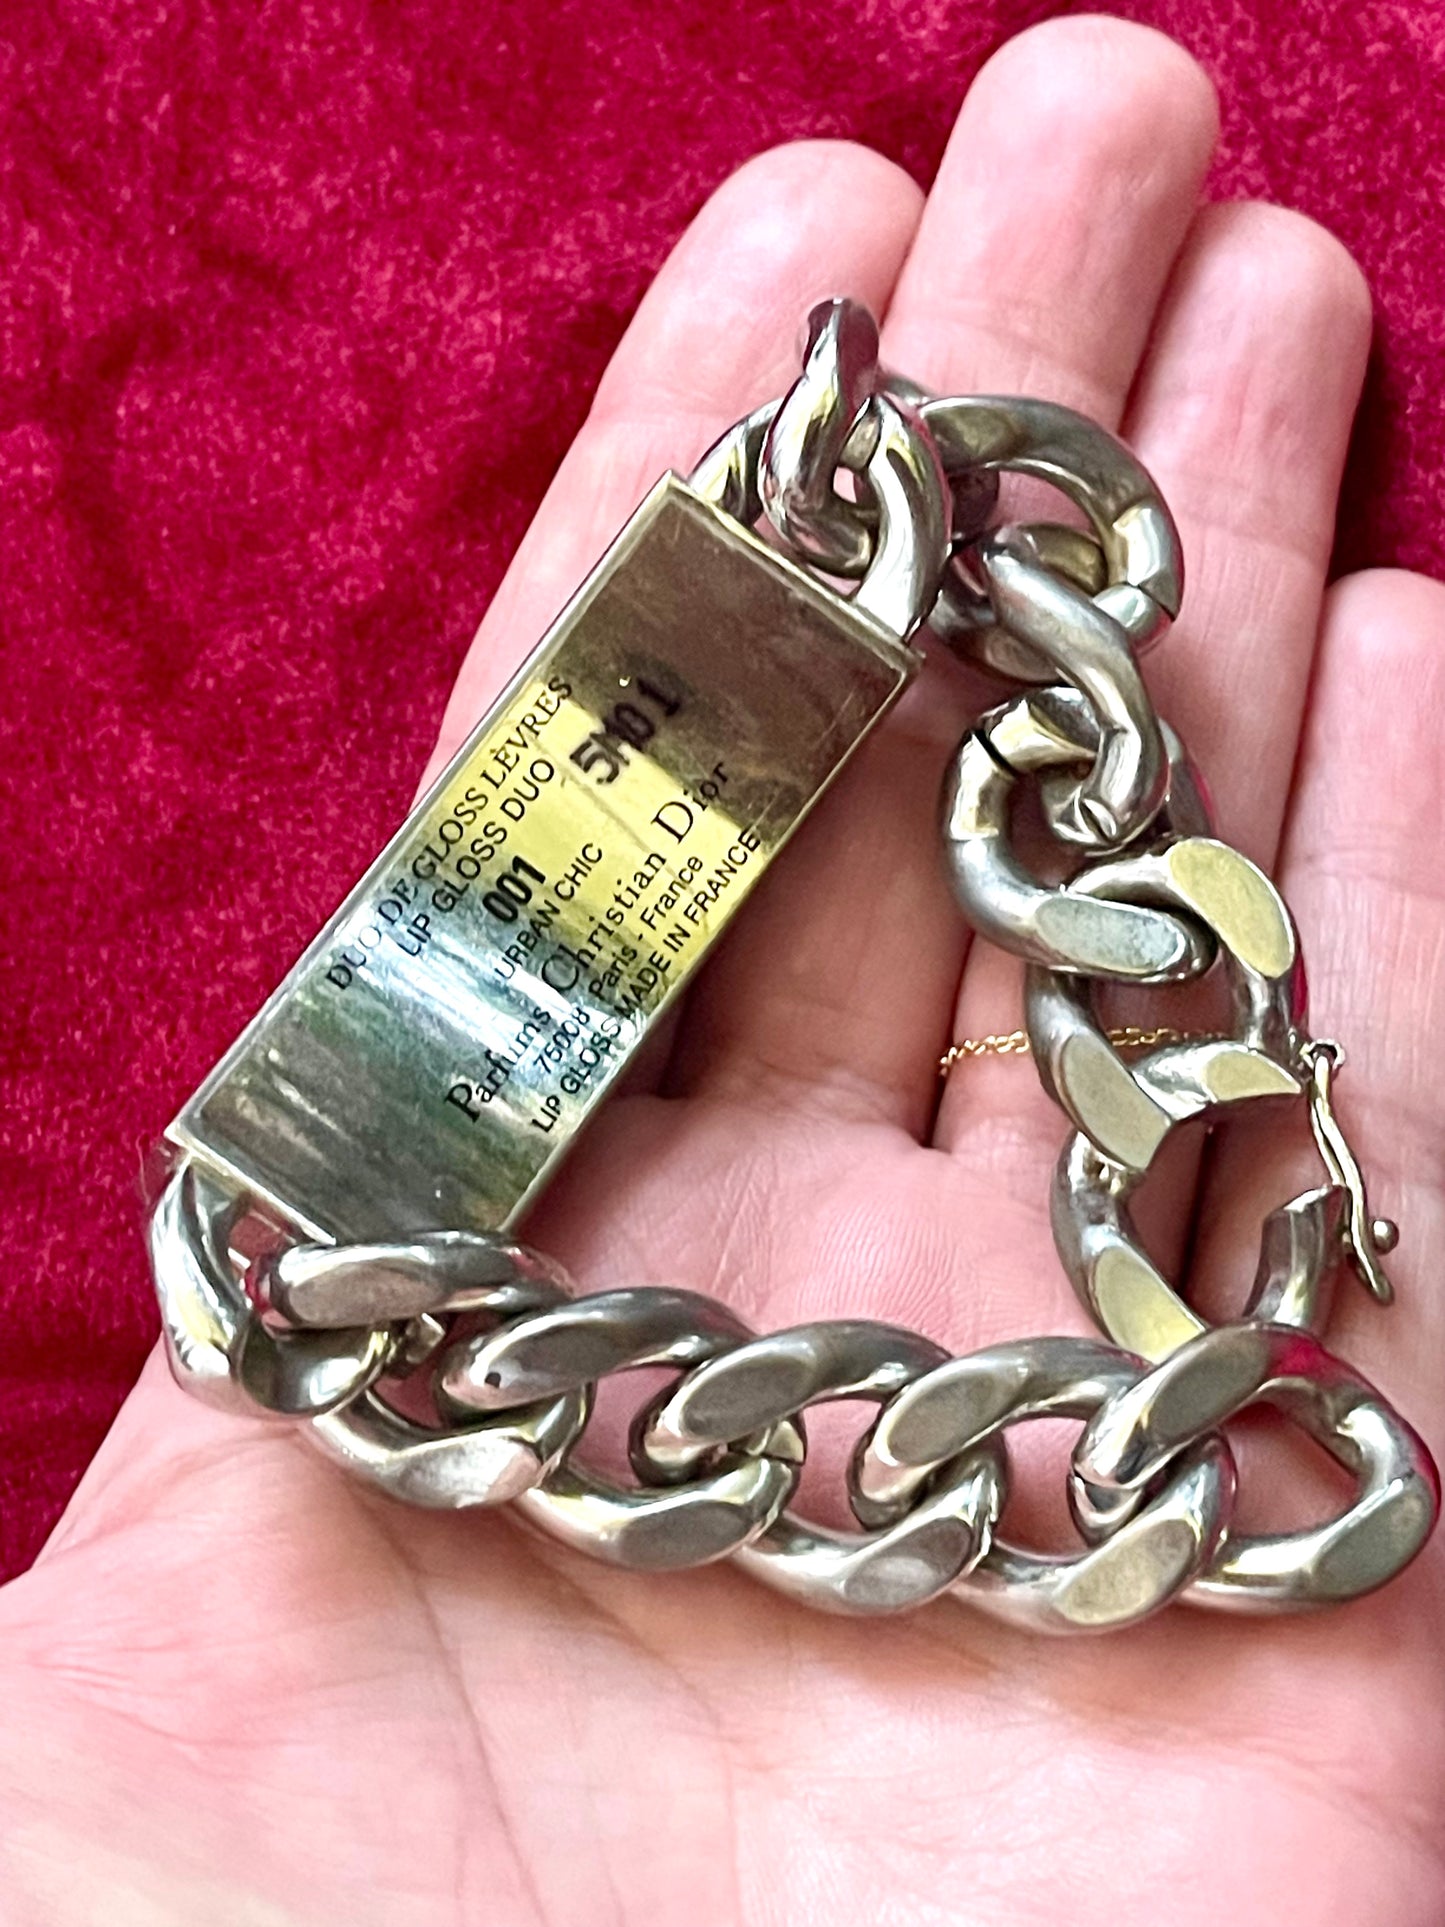 New Arrival Preloved Dior Beauty Chunky Chain is